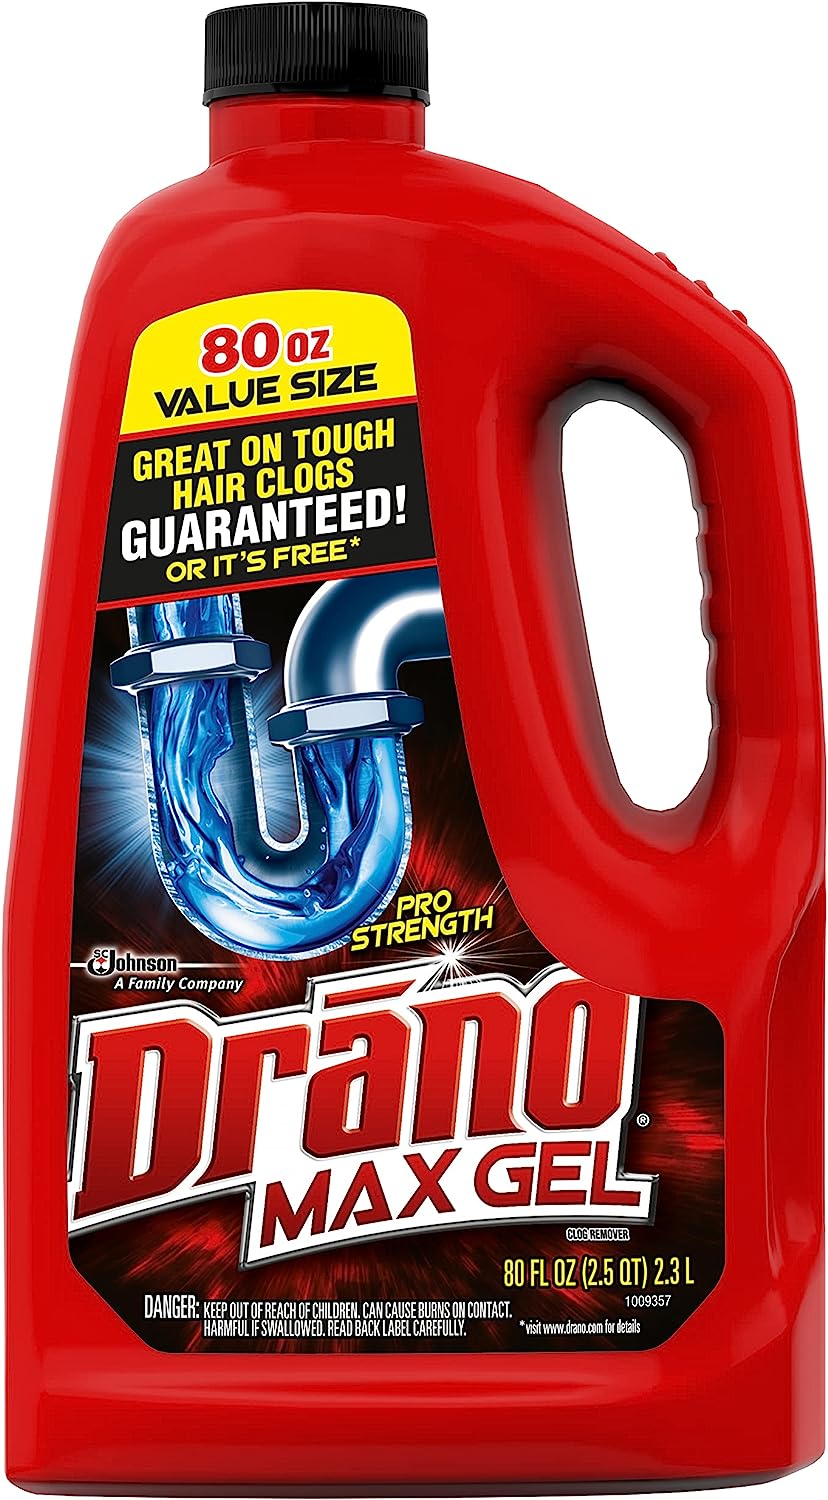 Drano Max Gel Drain Clog Remover and Cleaner for [...]